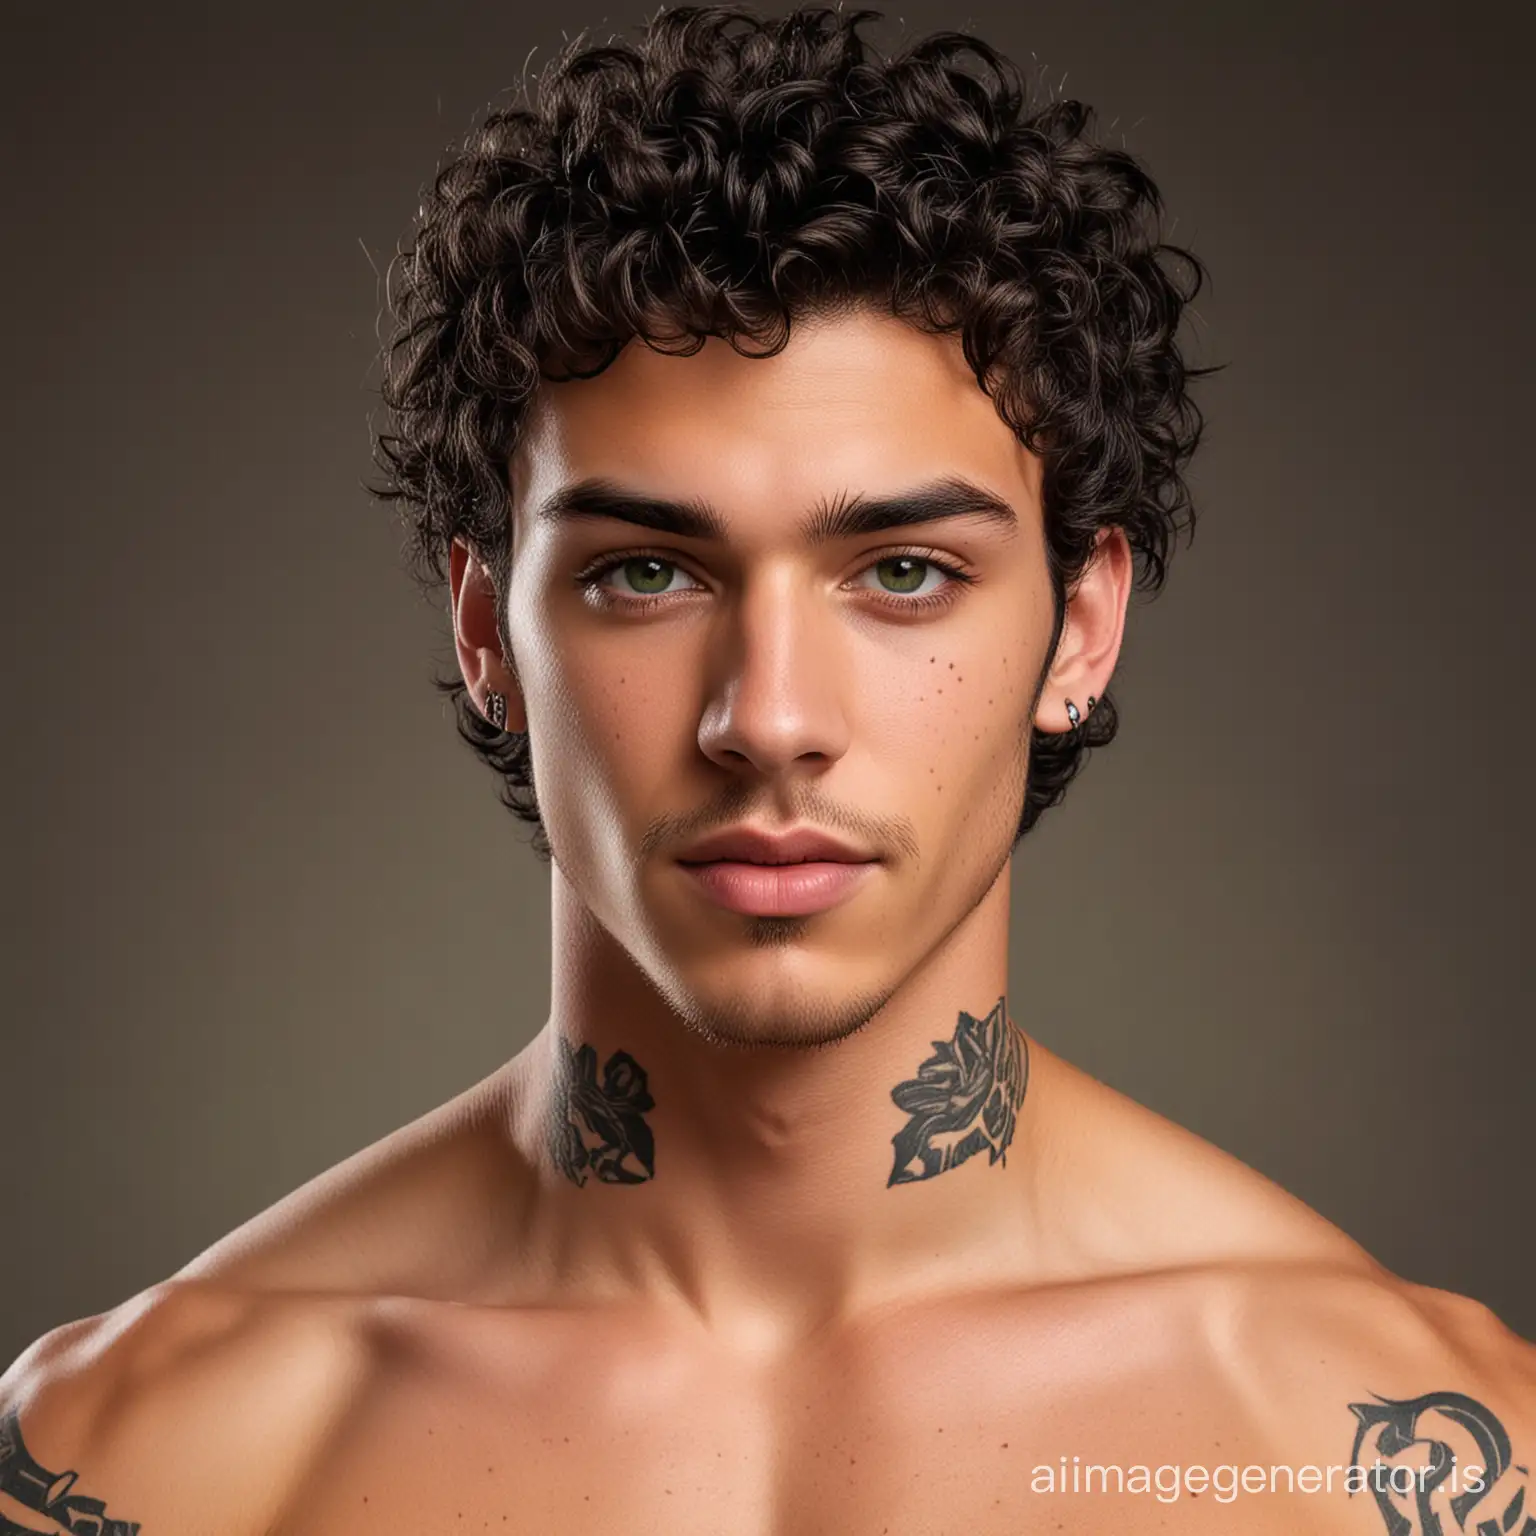 young man, 19 years old, short black loose curly hair, bright emerald green eyes, brown skin tone, chiseled jaw line, clean shaven, cruel smirk, he has tattoos, neck tattoos, very strong, very tall, athlete, rich, wearing a very fancy outfit